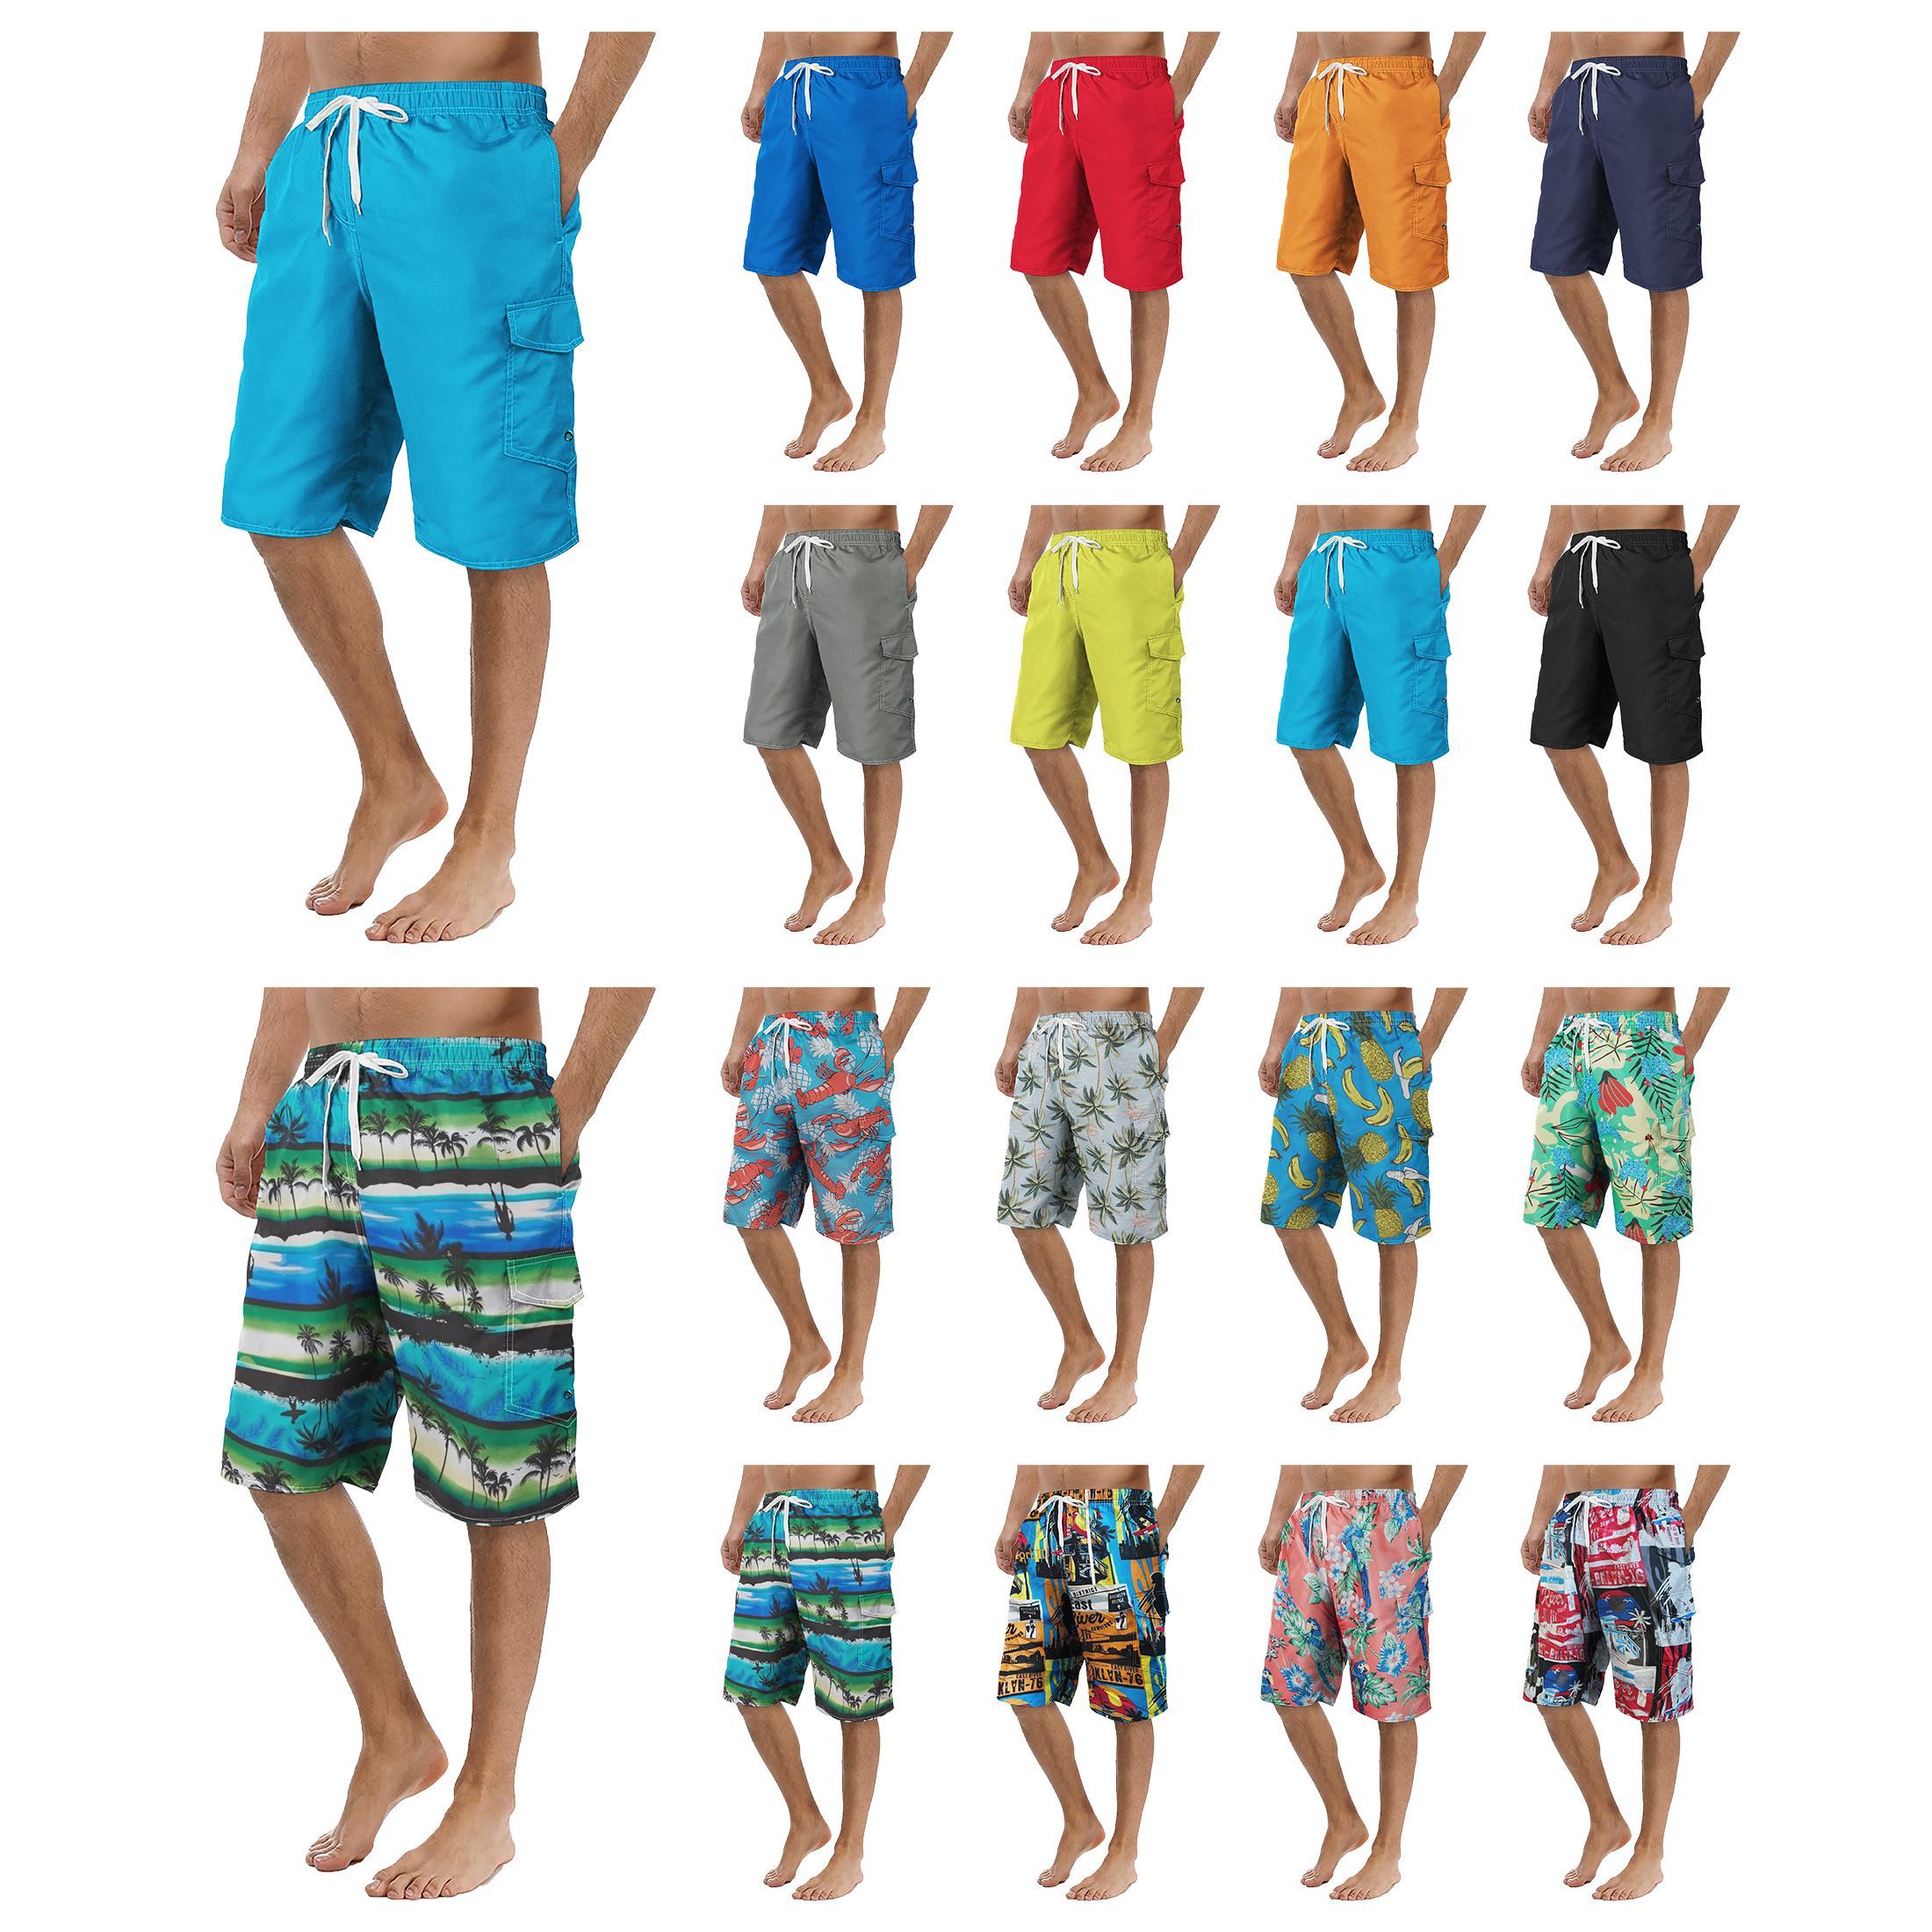 3-Pack Men's Swim Cargo Shorts With Pockets Drawstring Beach Board Shorts Solid Bathing Trunks Cropped Trouser Pants Summer Suit Multi Color